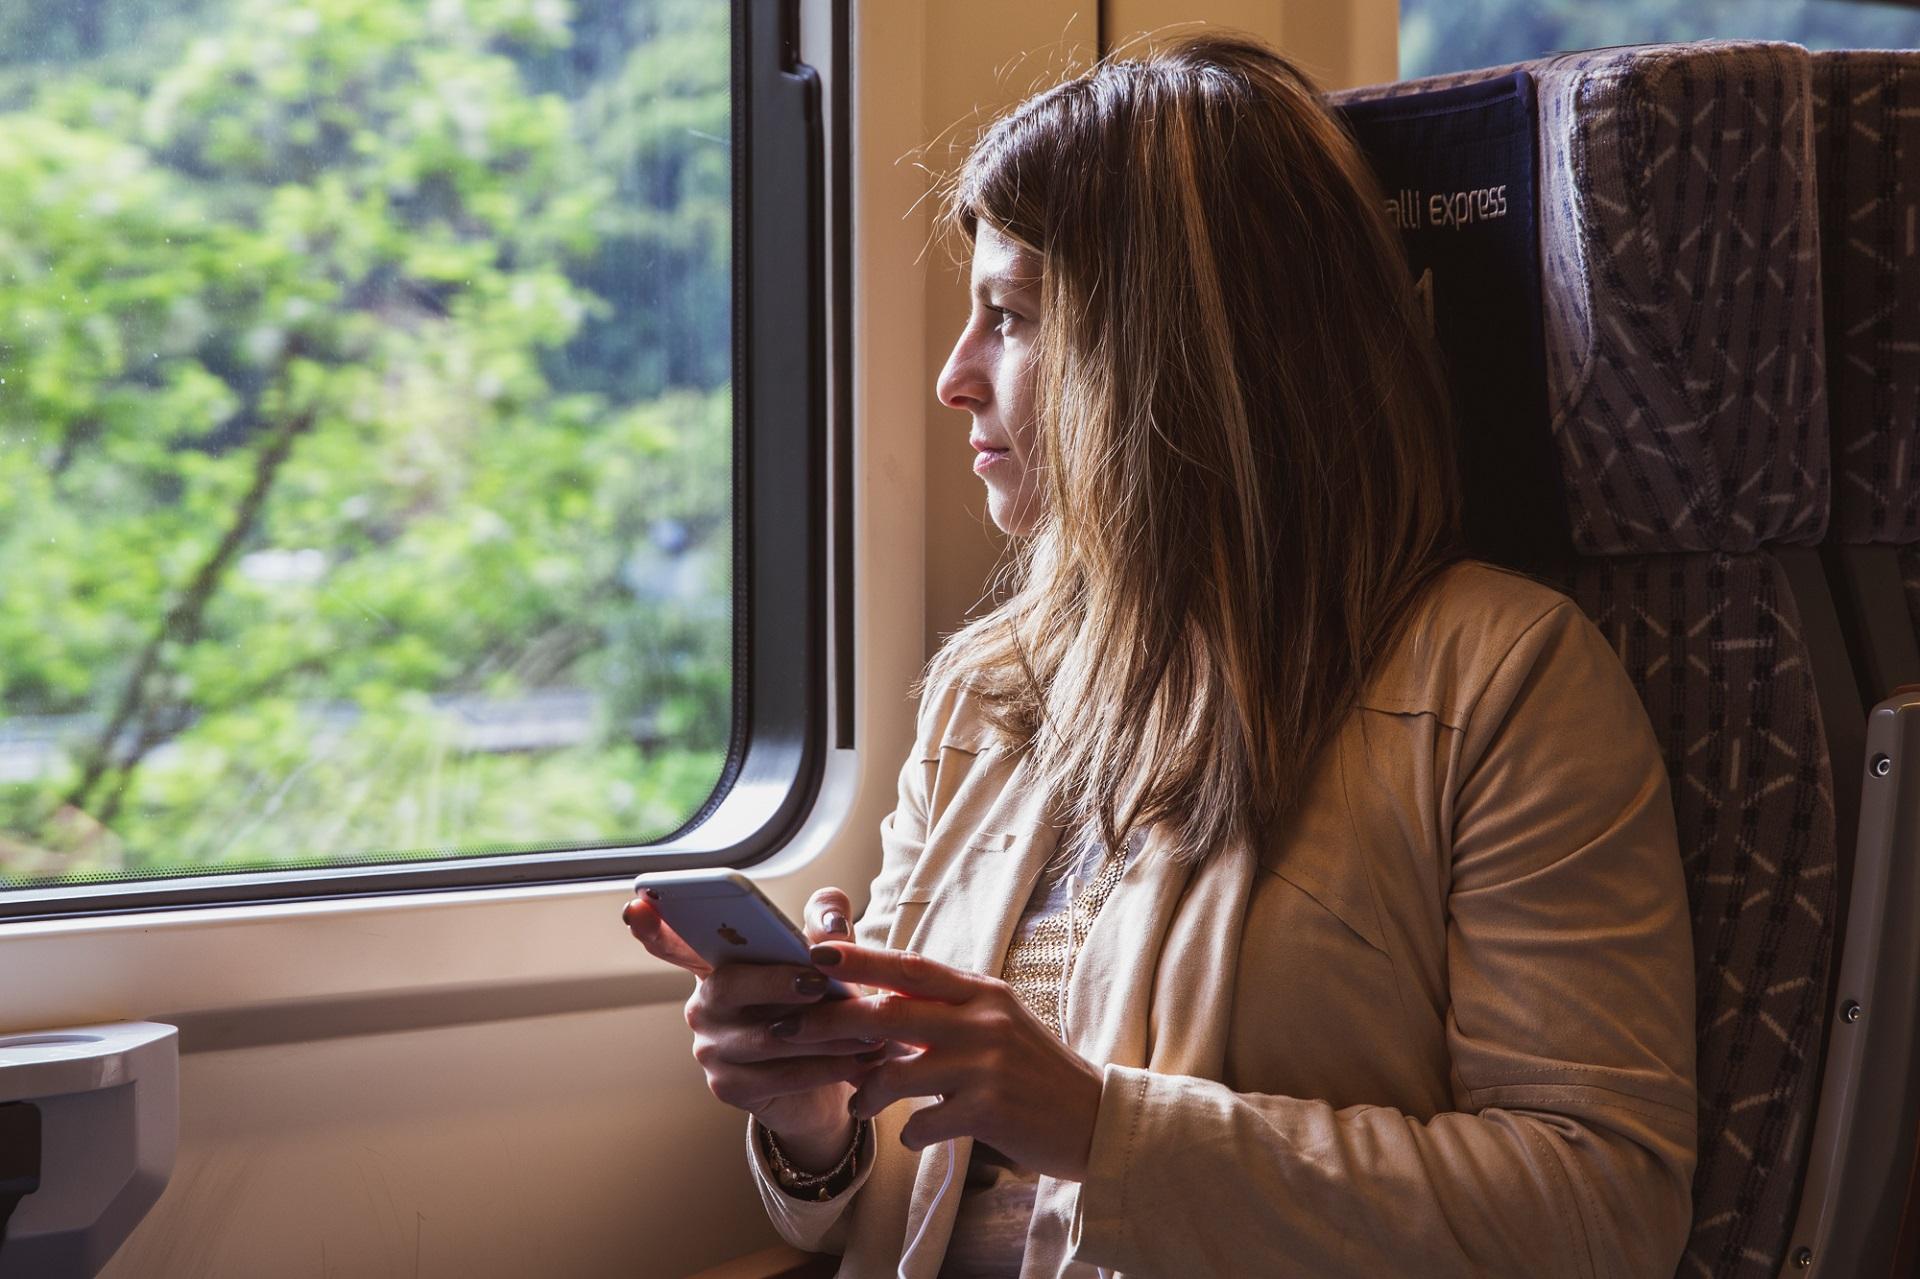 Free audioguides on international trains